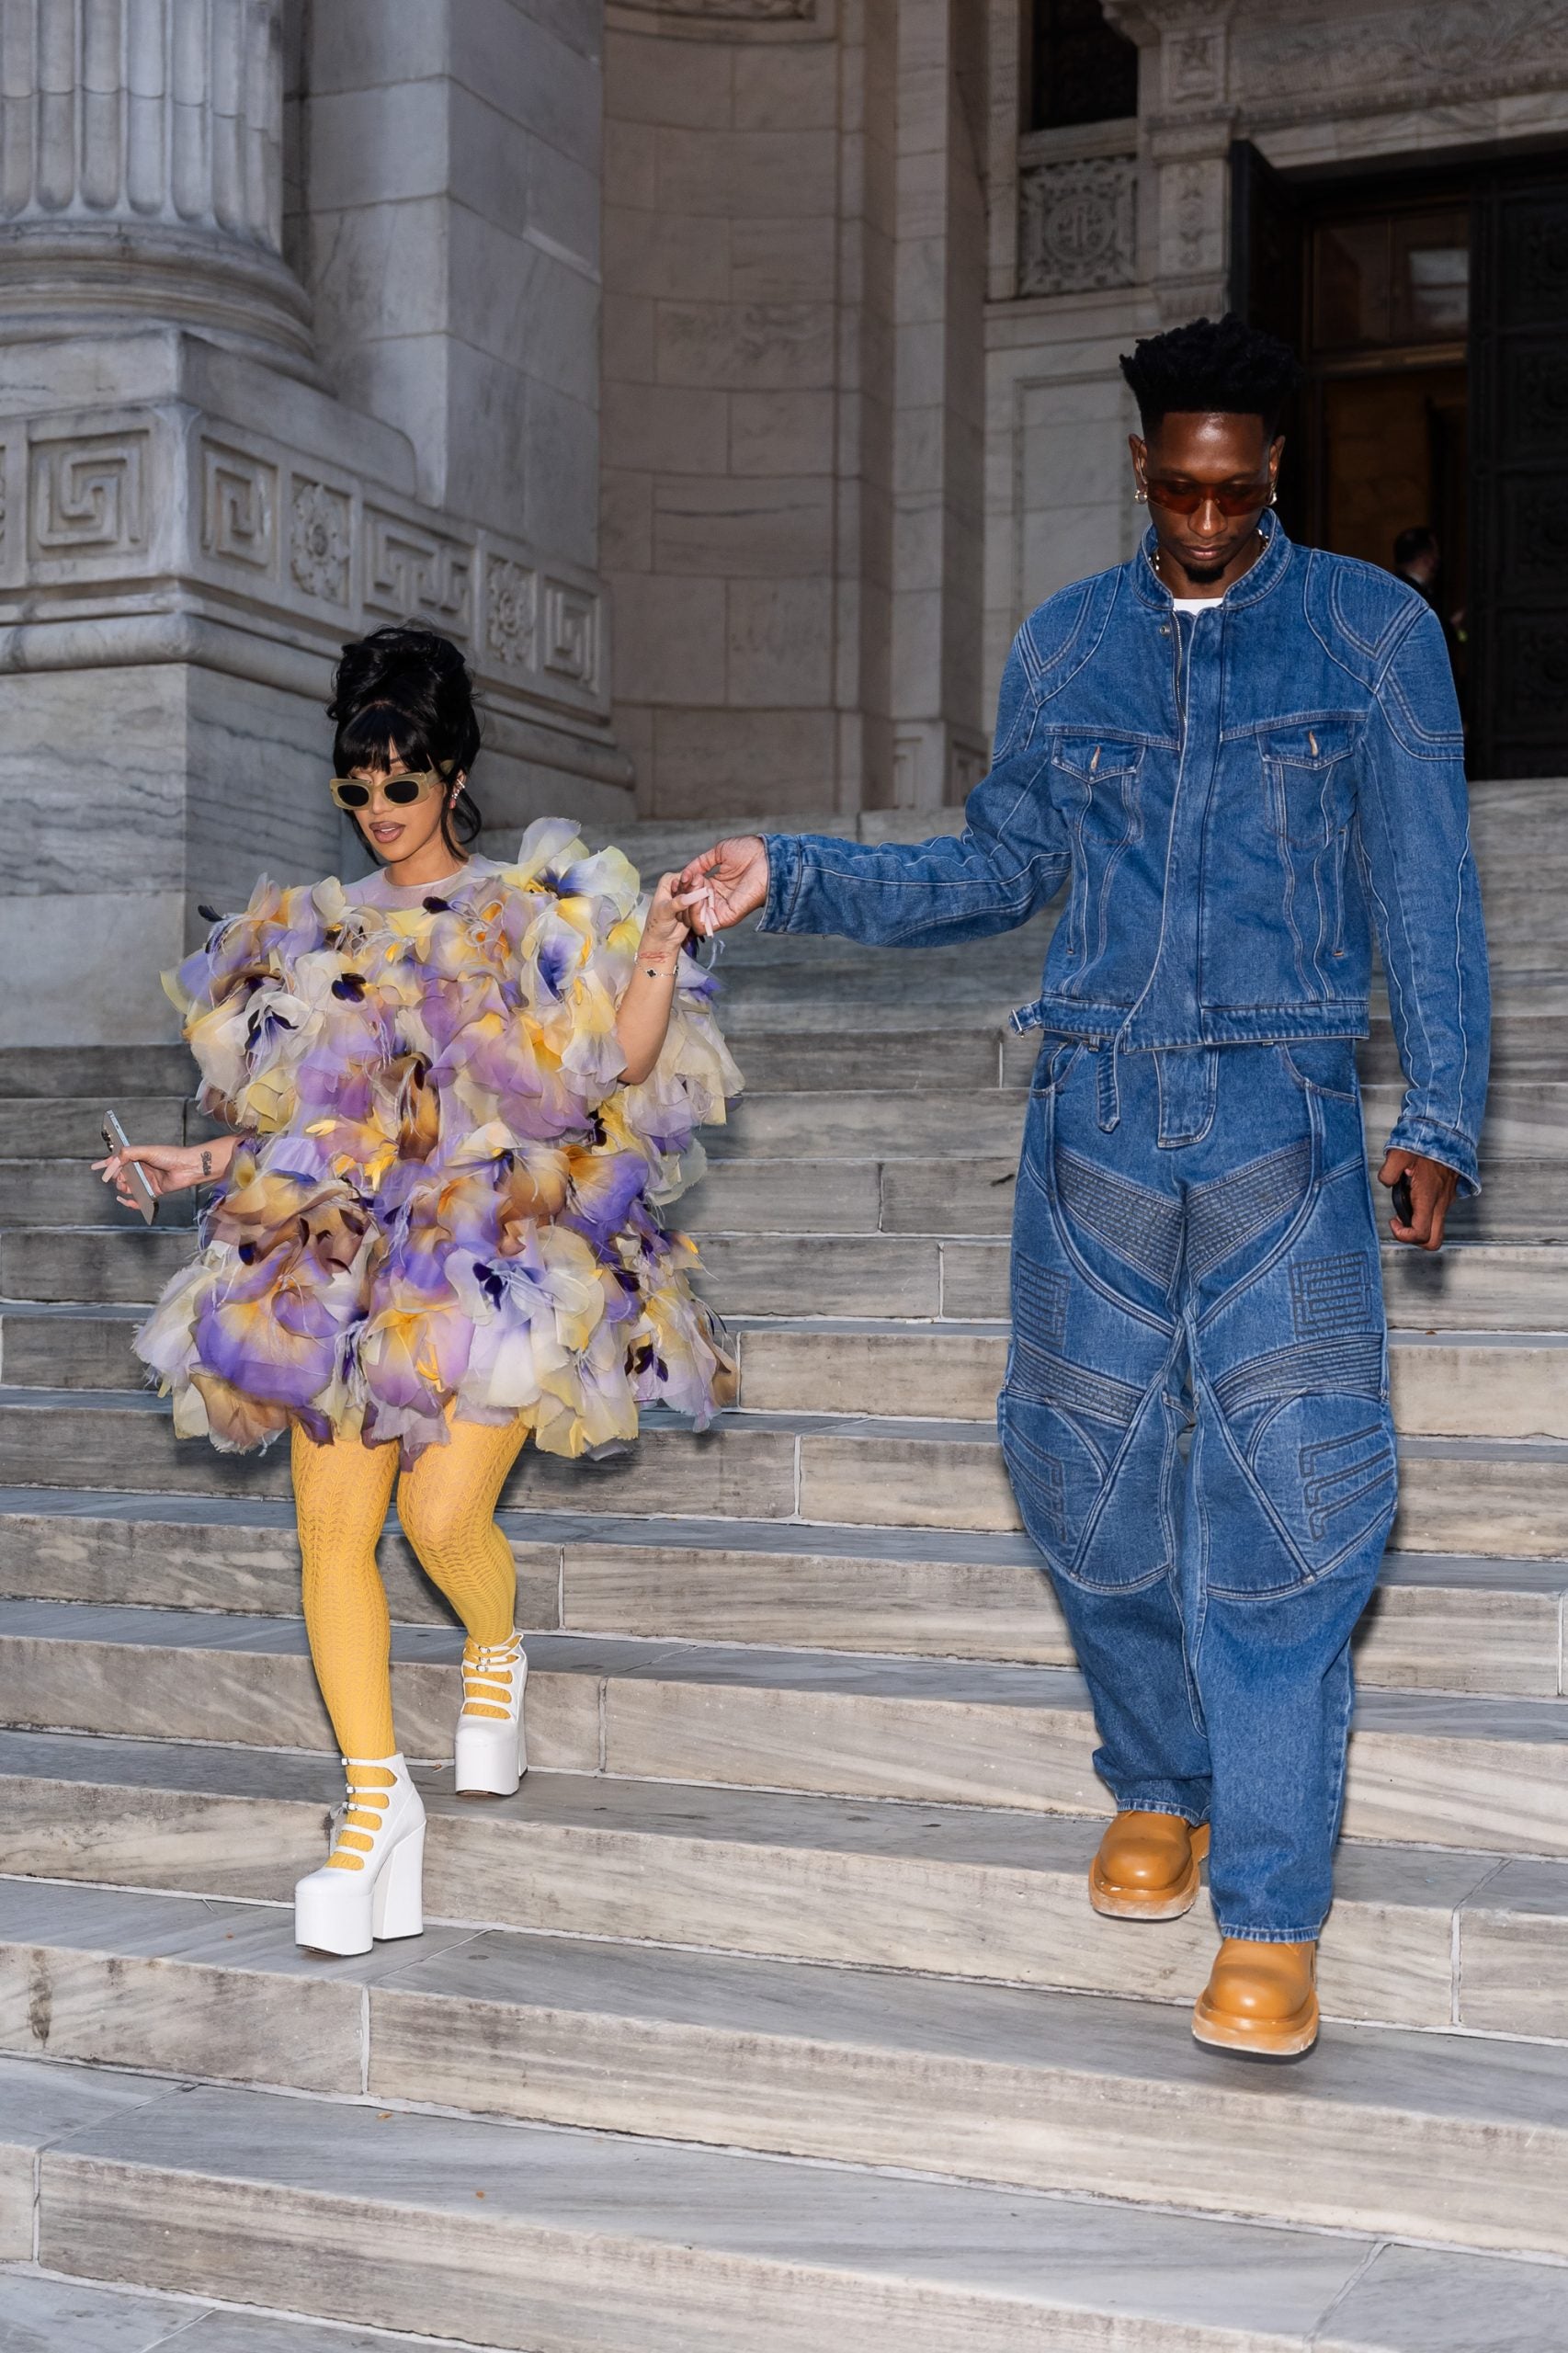 Cardi B Has A Whimsy Fashion Moment In Marc Jacobs